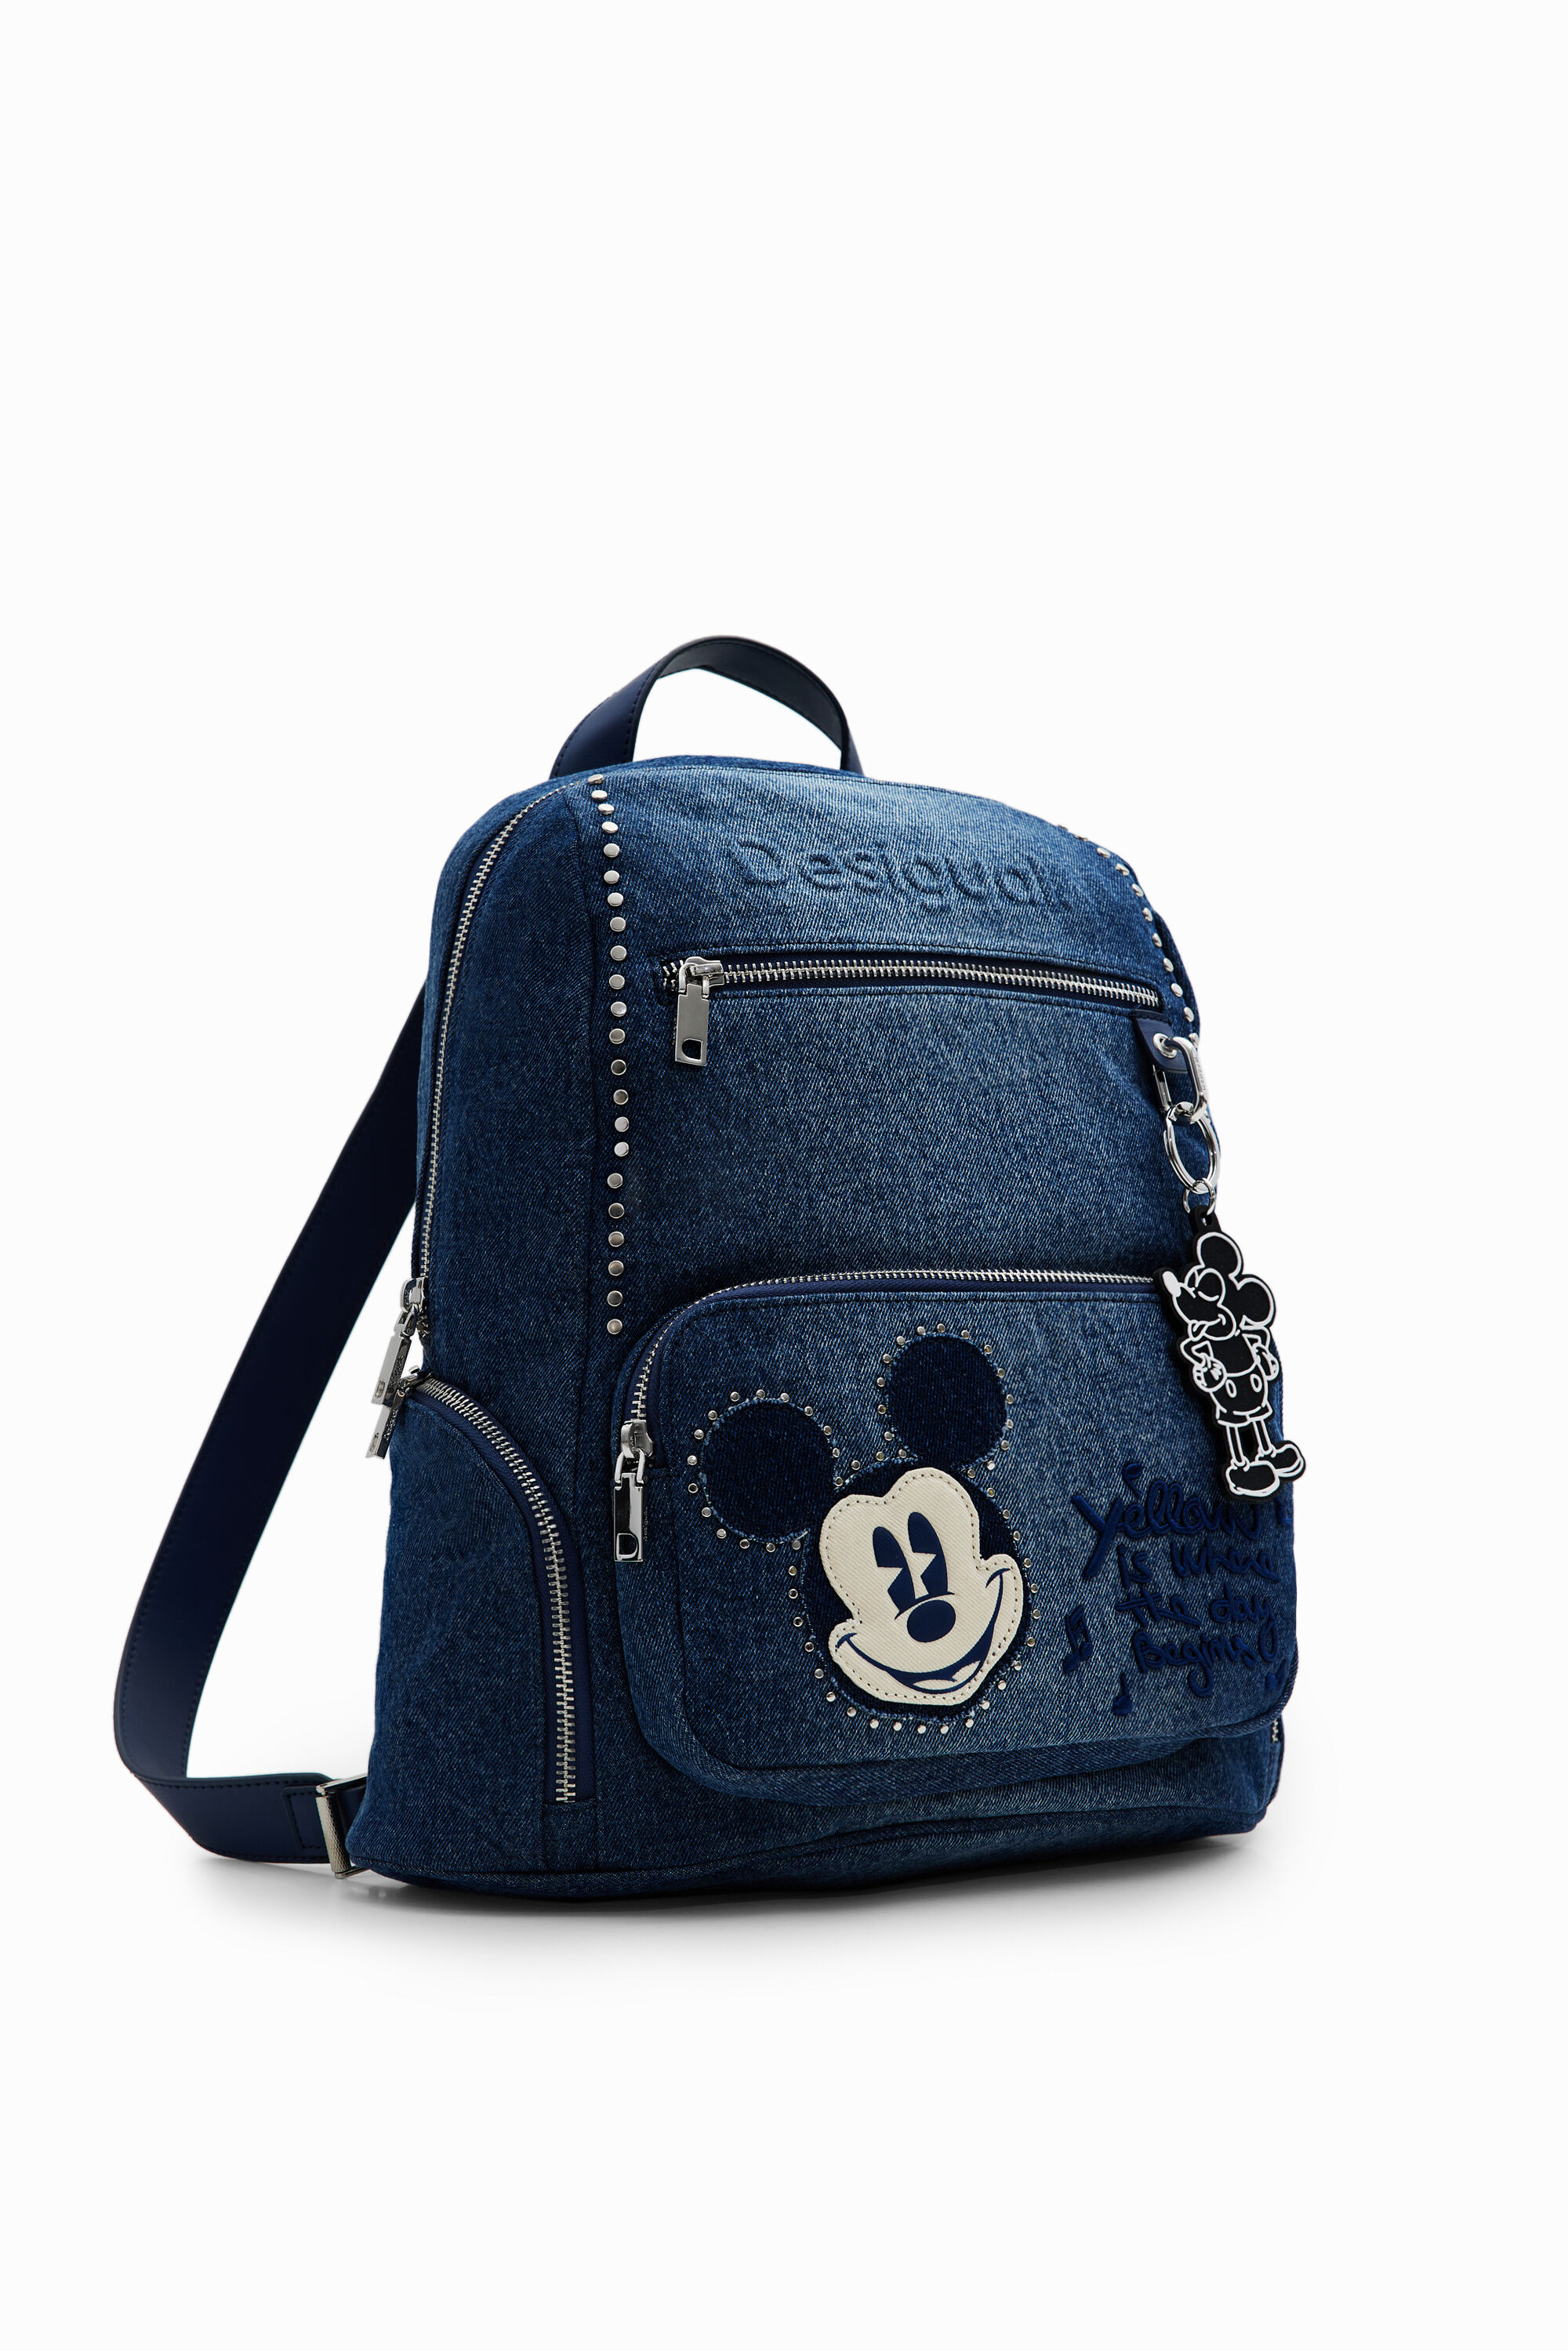 M Mickey Mouse backpack - BLUE - U